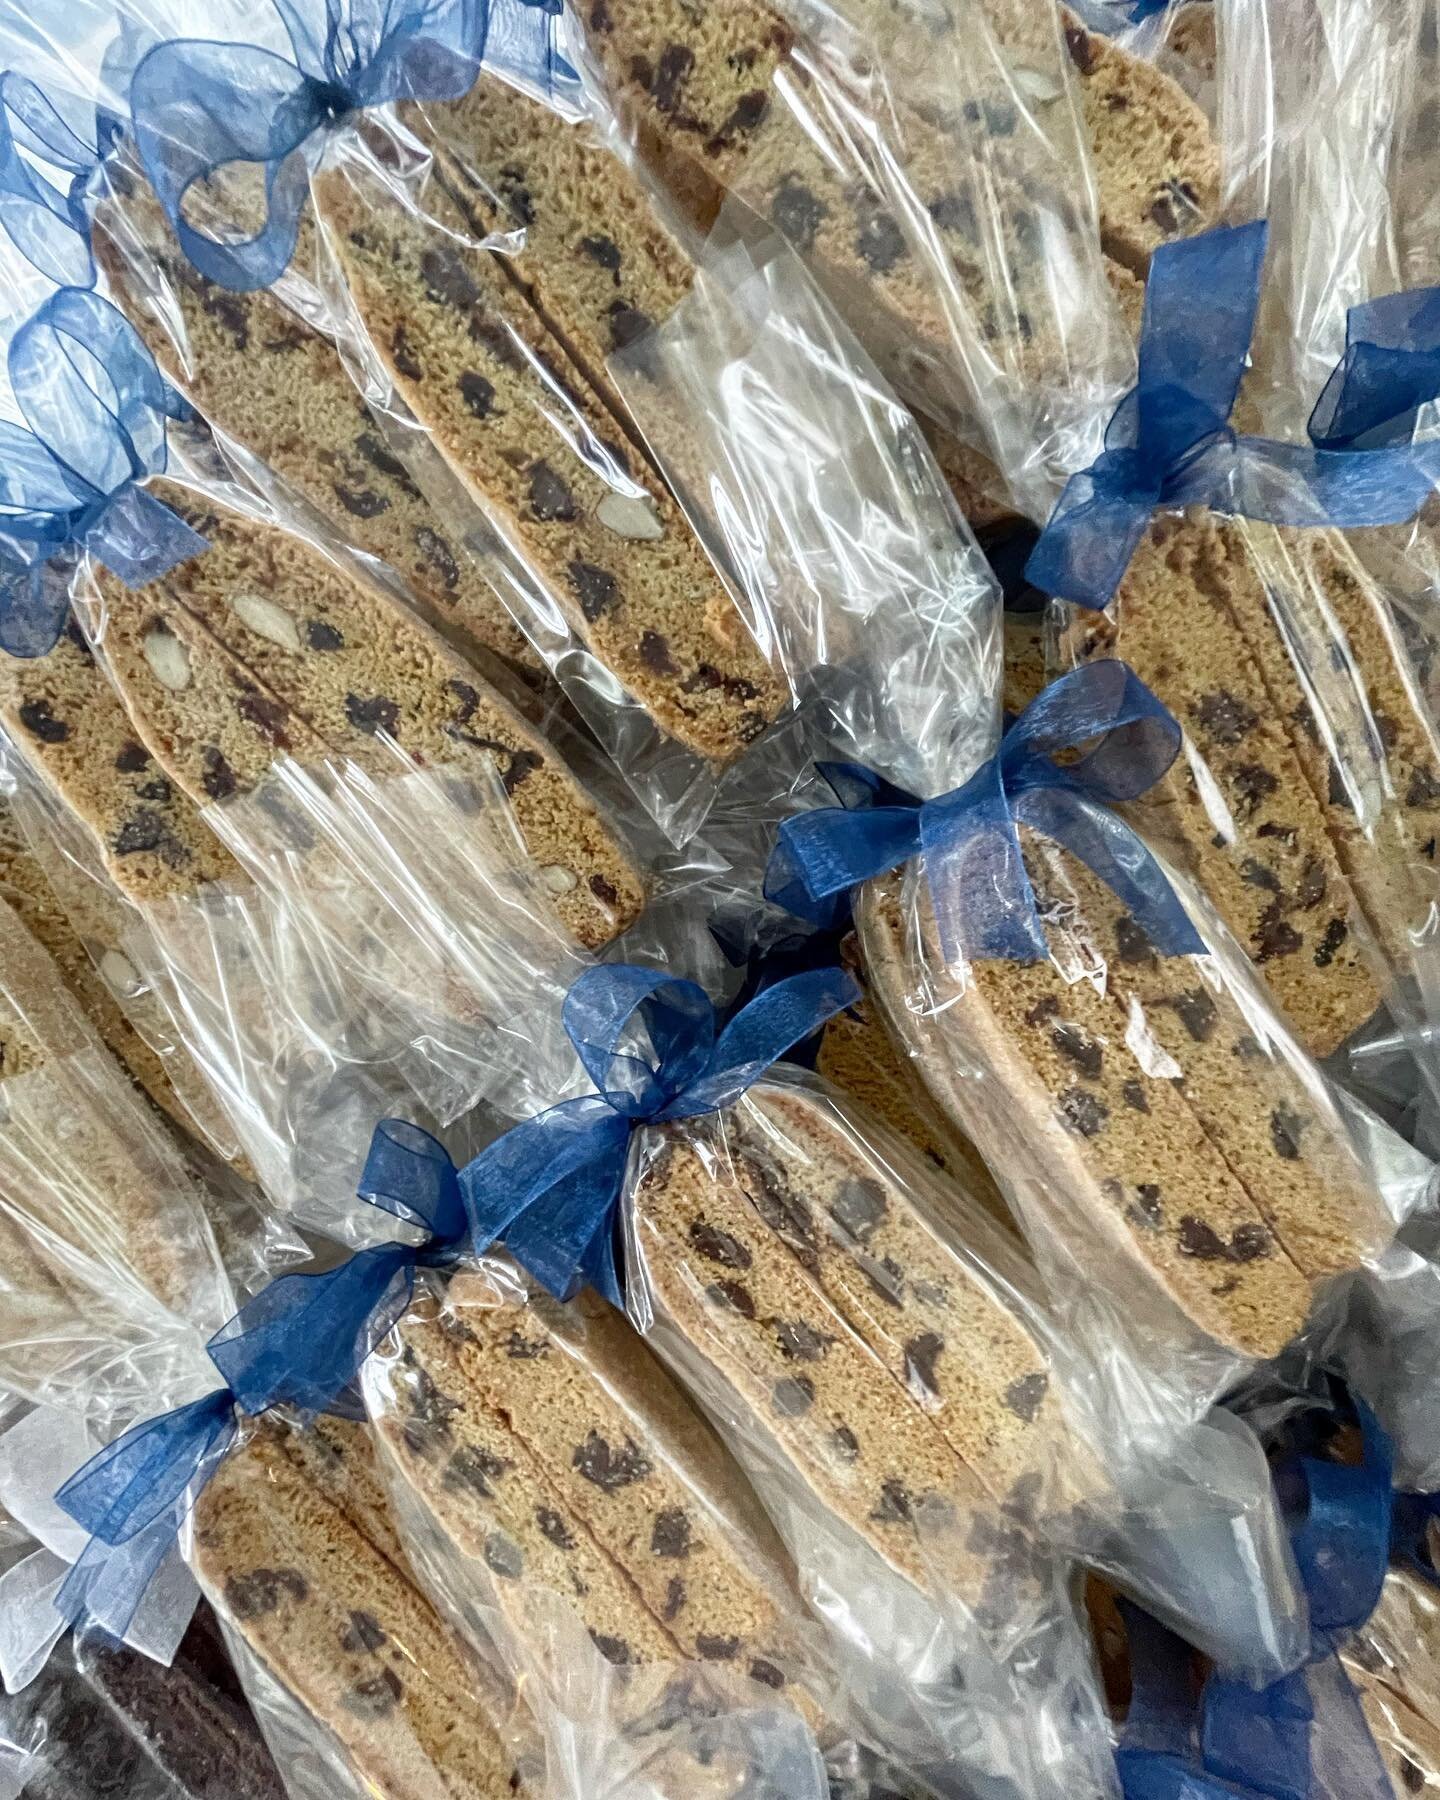 Our biscotti are the perfect party favor for any occasion. We especially love making them for weddings 🤗Send your guests home with a sweet remembrance of your special day ❤️🥰
Click the link in bio to talk to Cathy about your favors. 

#weddingfavor